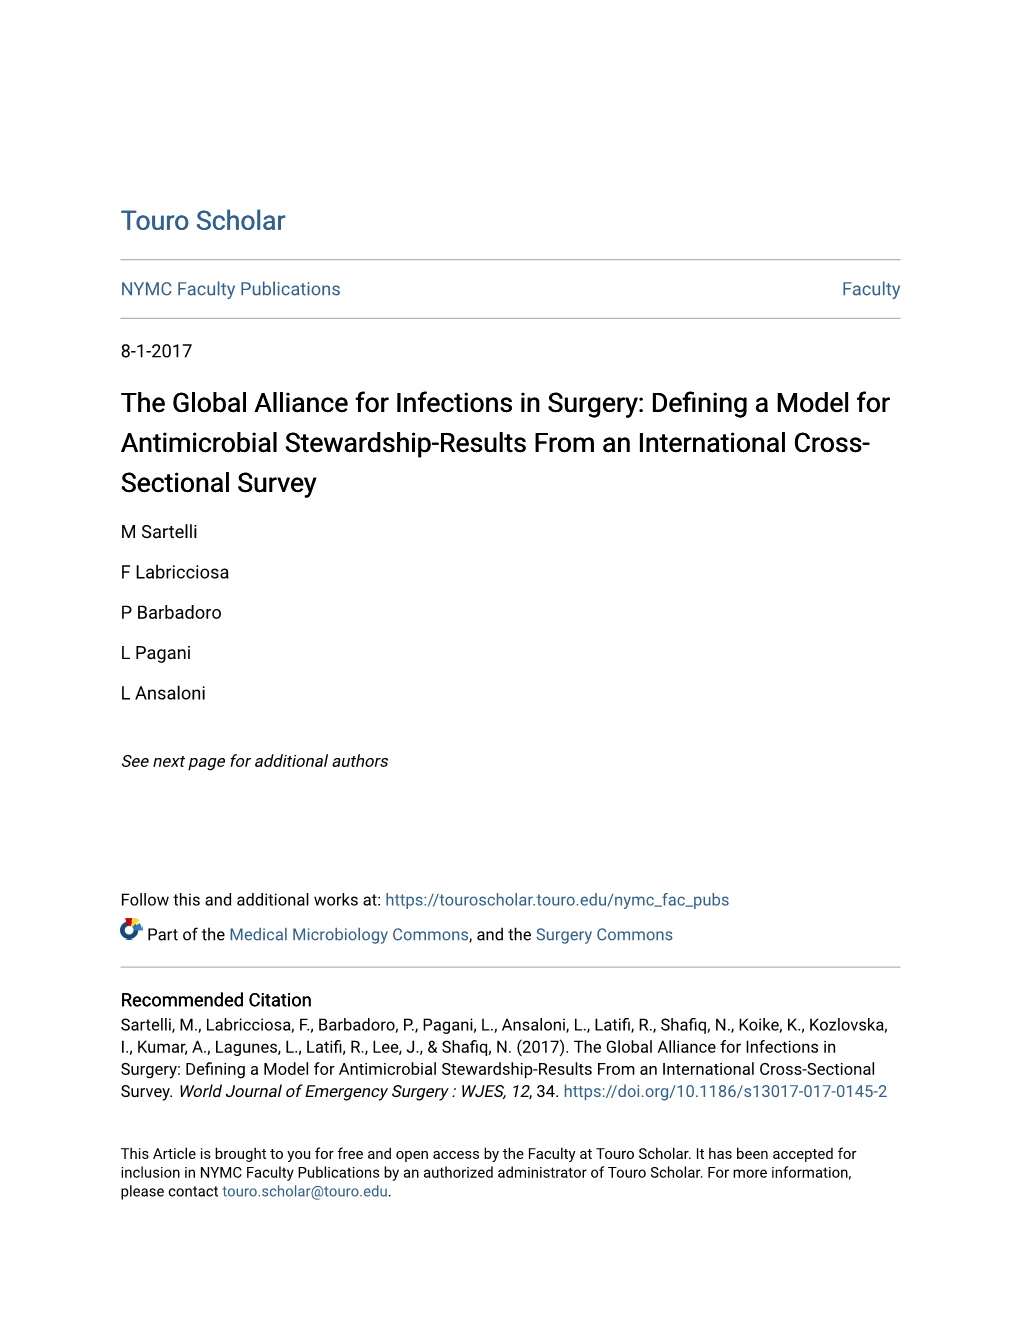 The Global Alliance for Infections in Surgery: Defining a Model for Antimicrobial Stewardship-Results from an International Cross- Sectional Survey